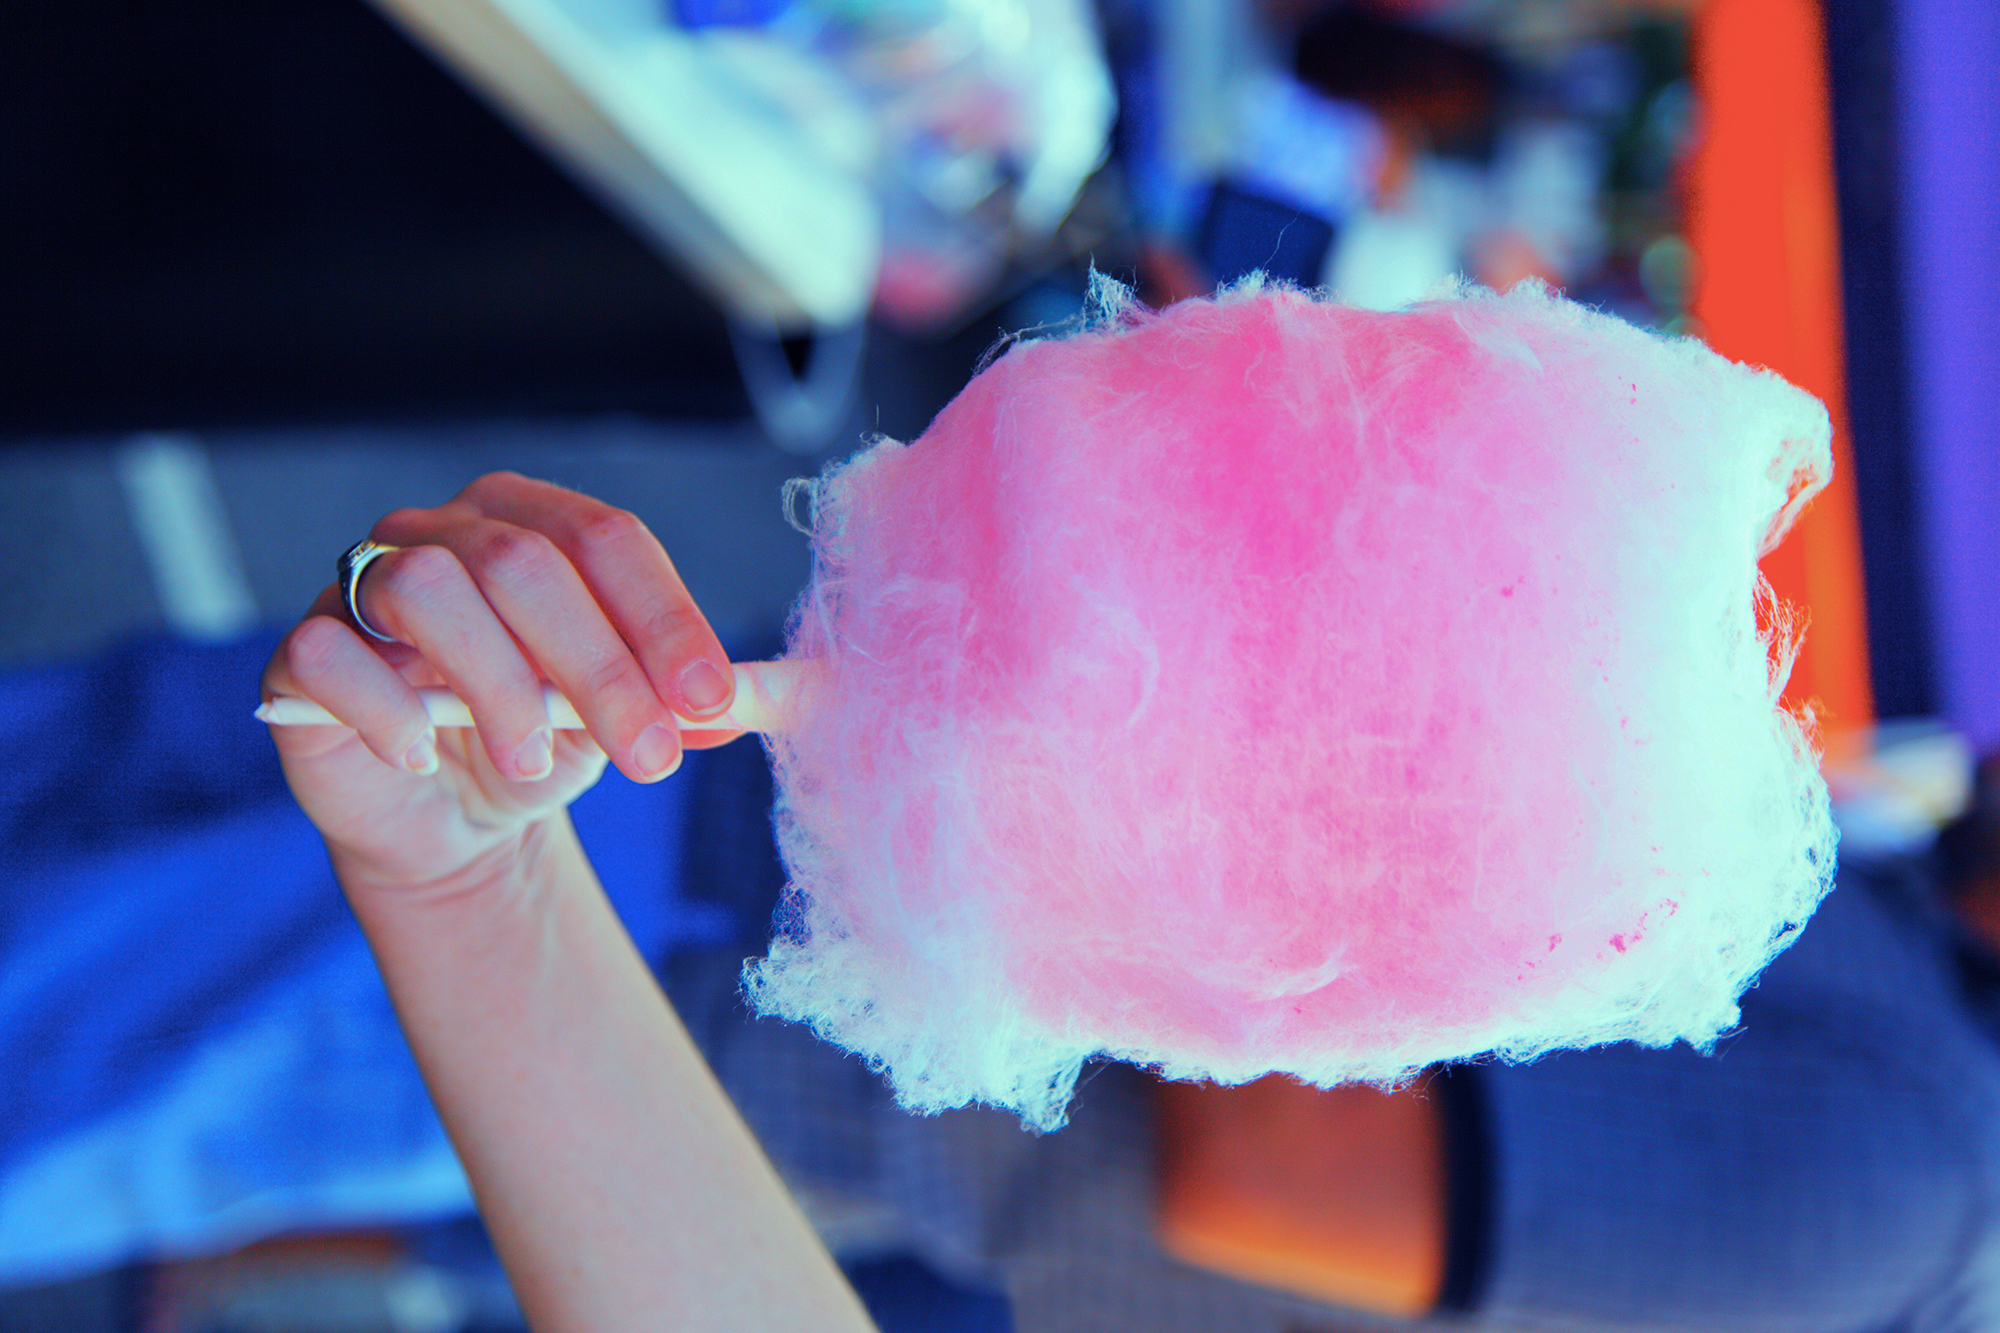 To date, children’s favorite street food Candy floss or Cotton candy never ...